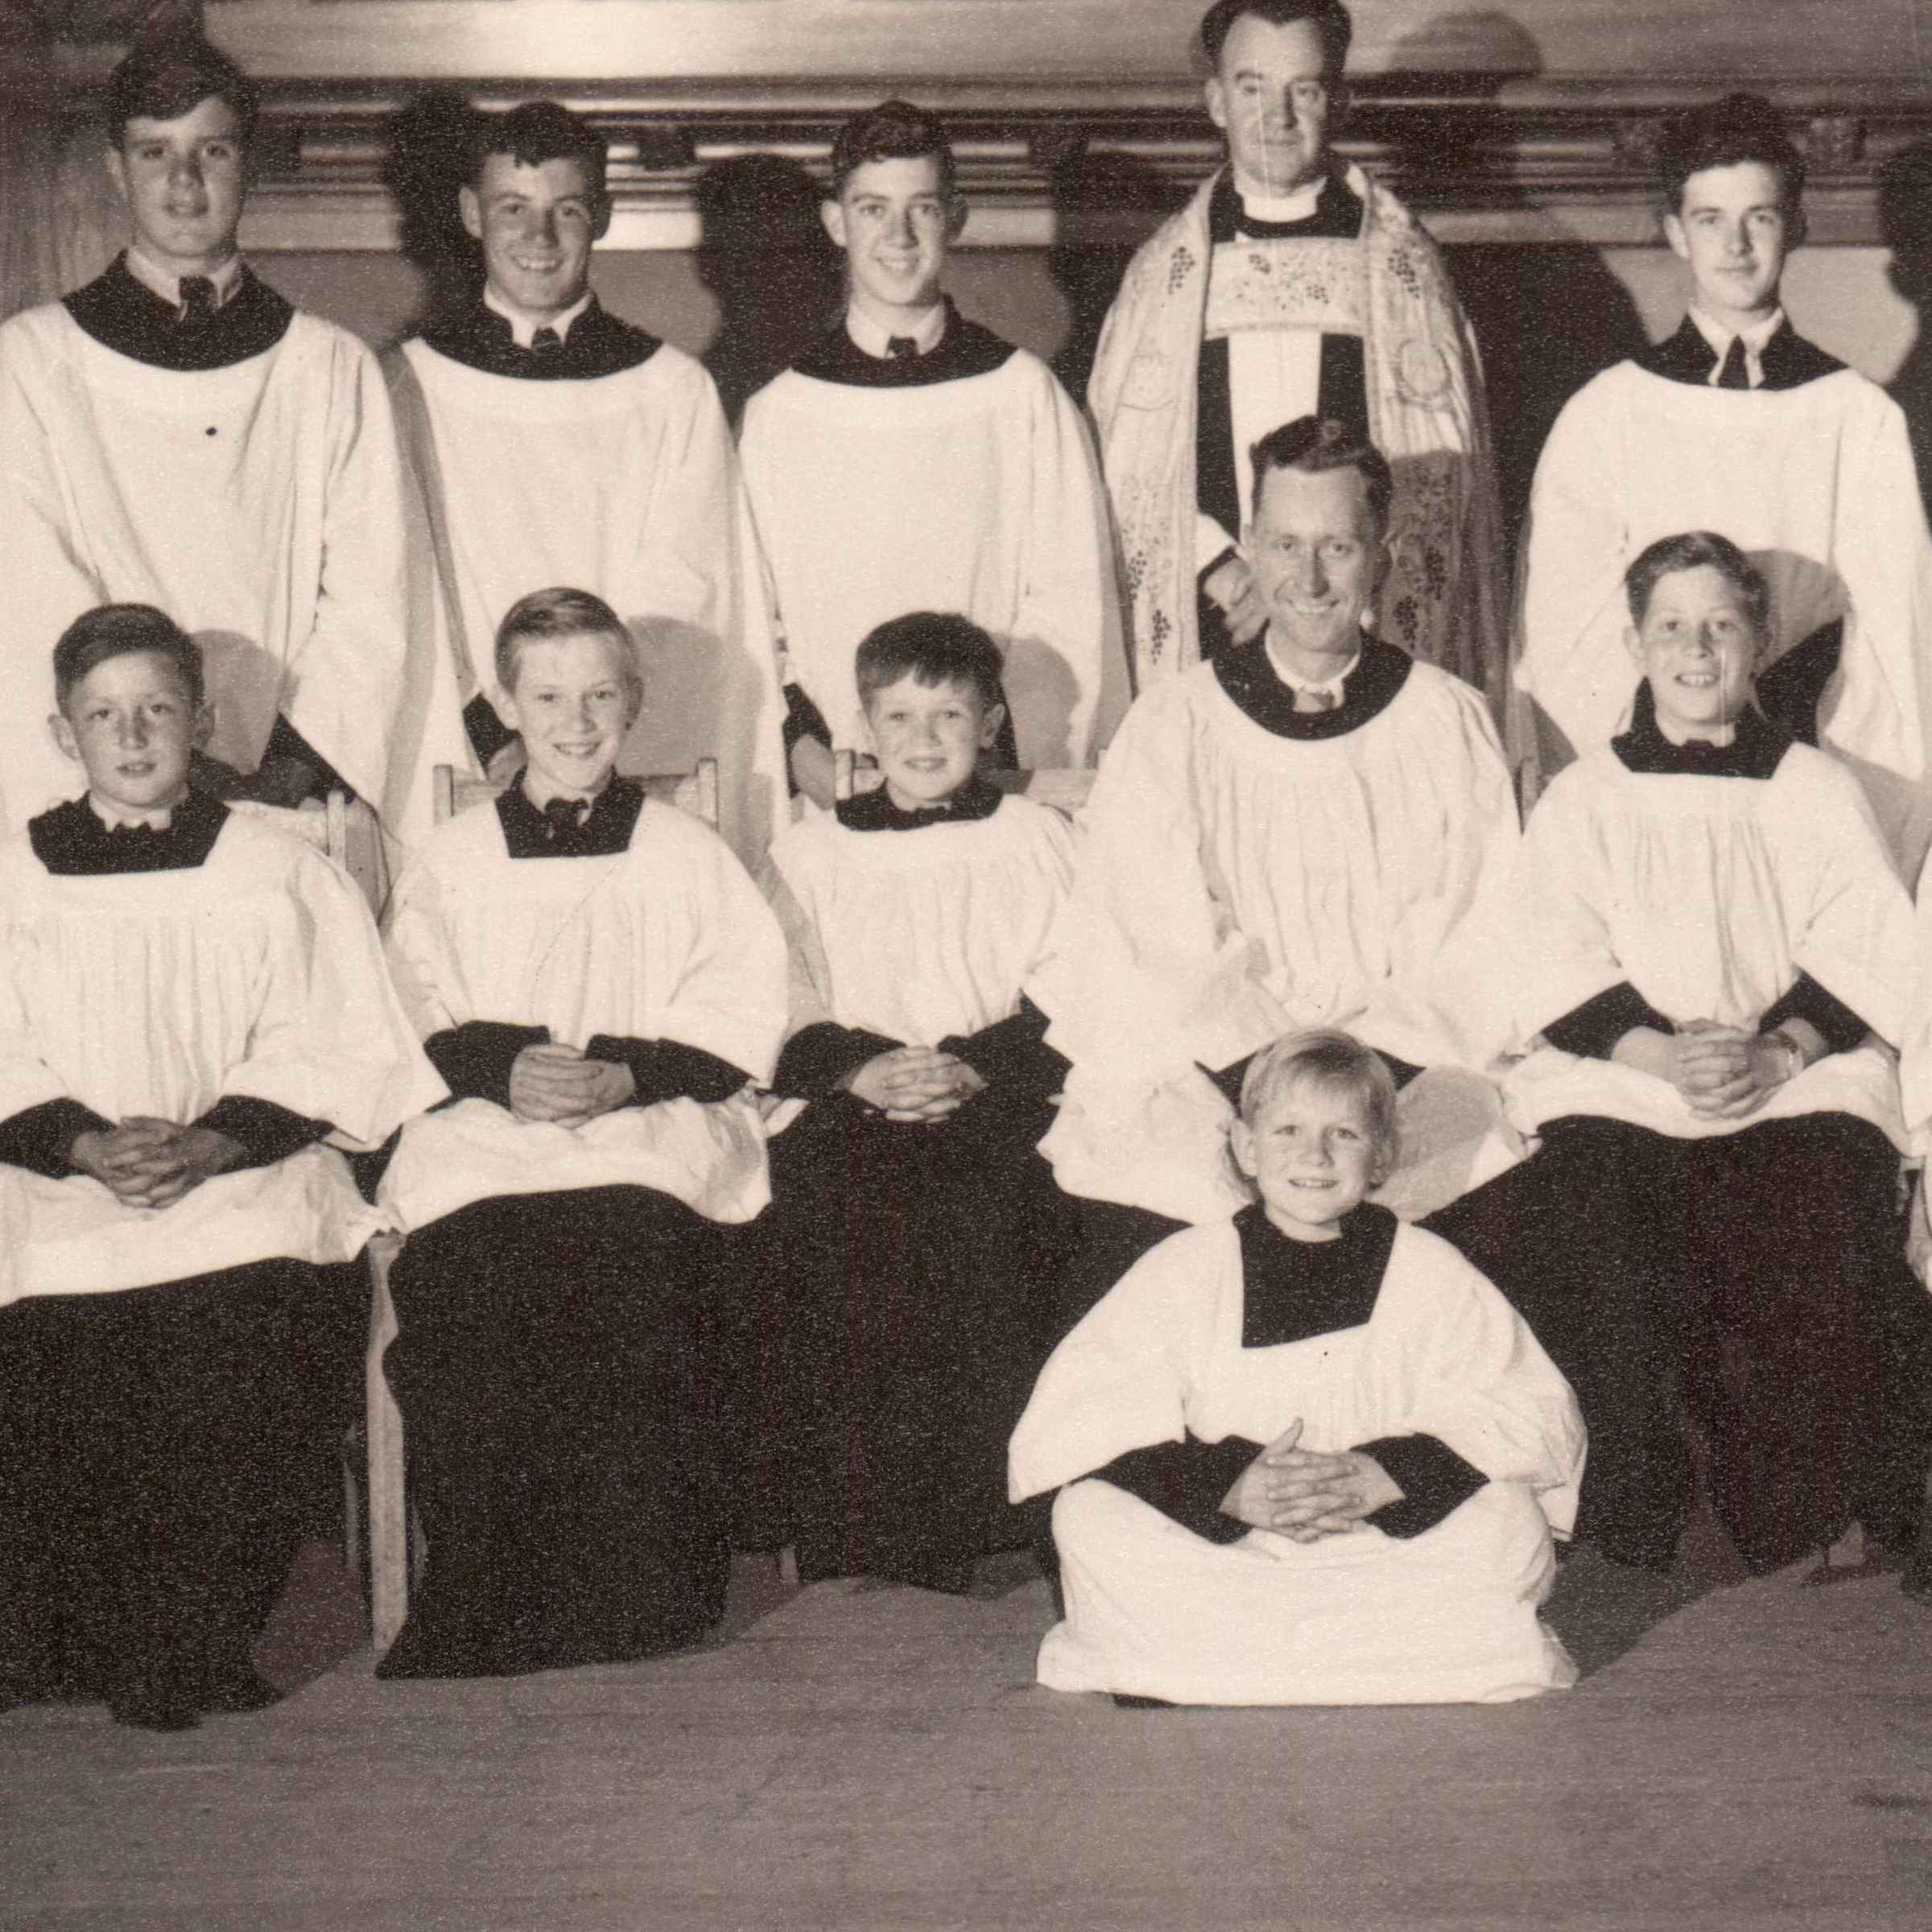 Choir with C S Brammall and J M Boyes, 1958. Source: The Hutchins School Archives and Heritage Collection.